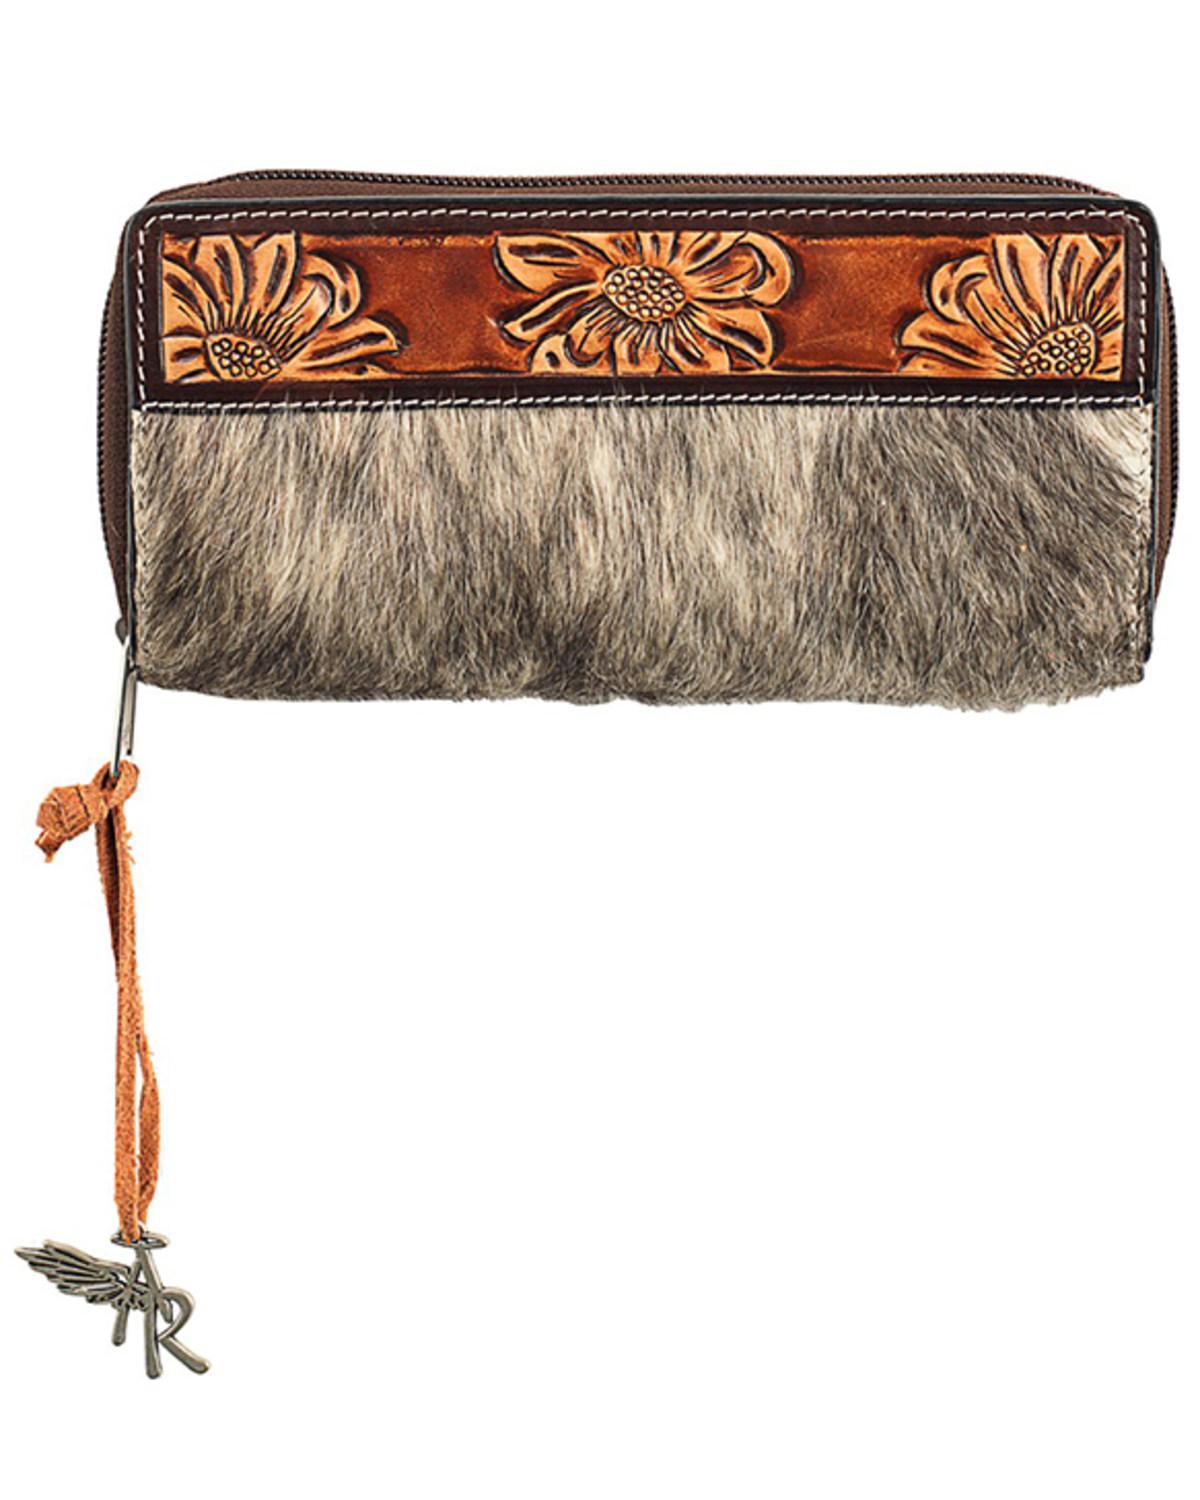 Angel Ranch Women's Spotted Calf Hair Wallet